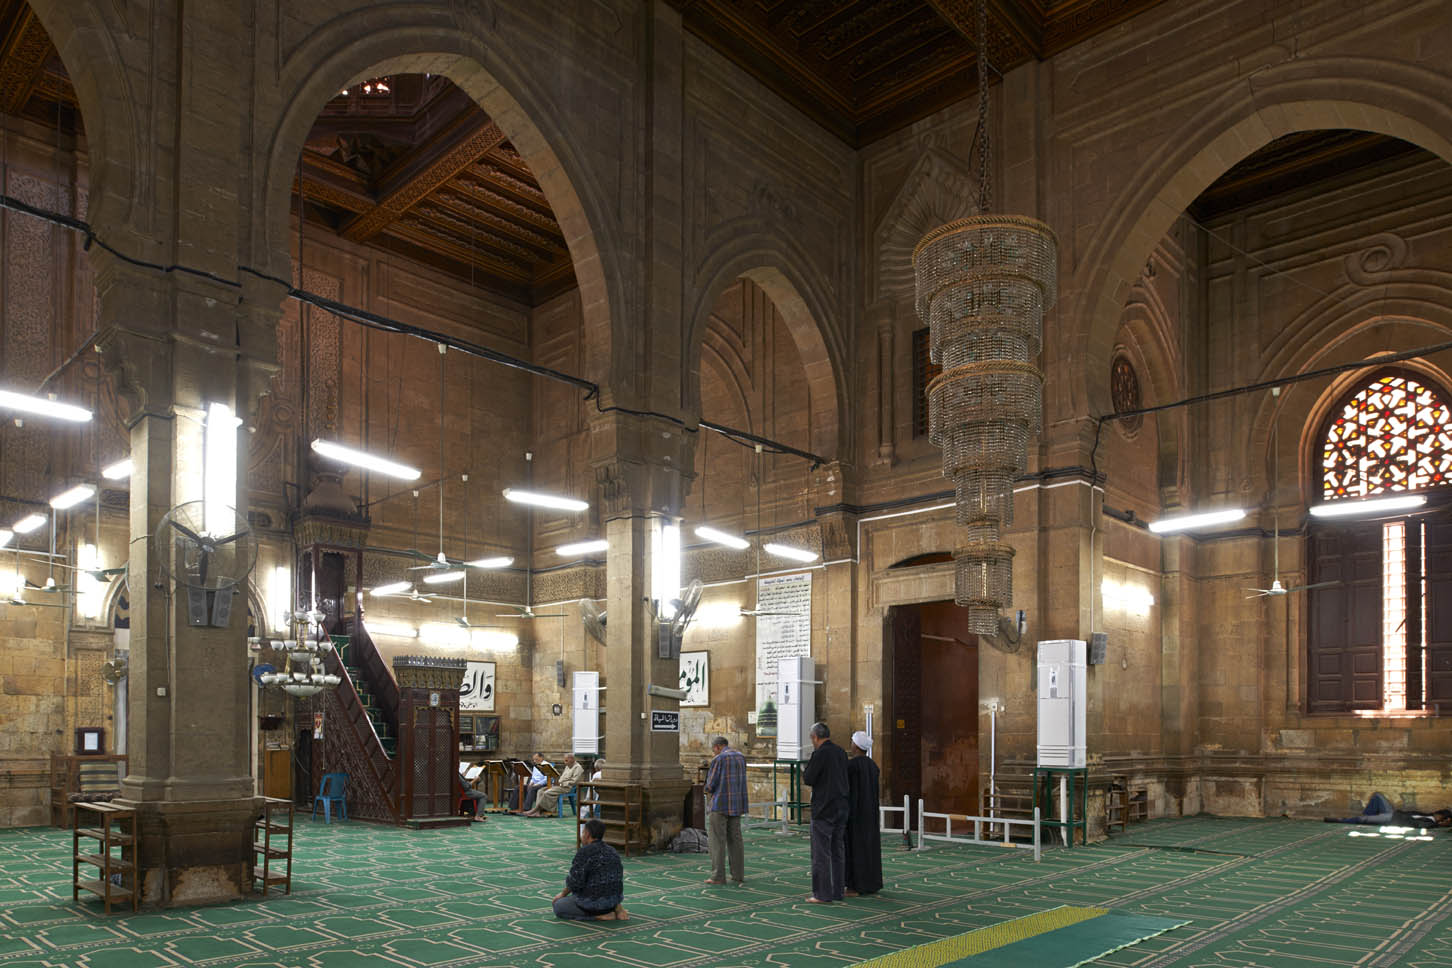 Prayer hall of mosque built by Abbas II on site of Qawsun's mosque